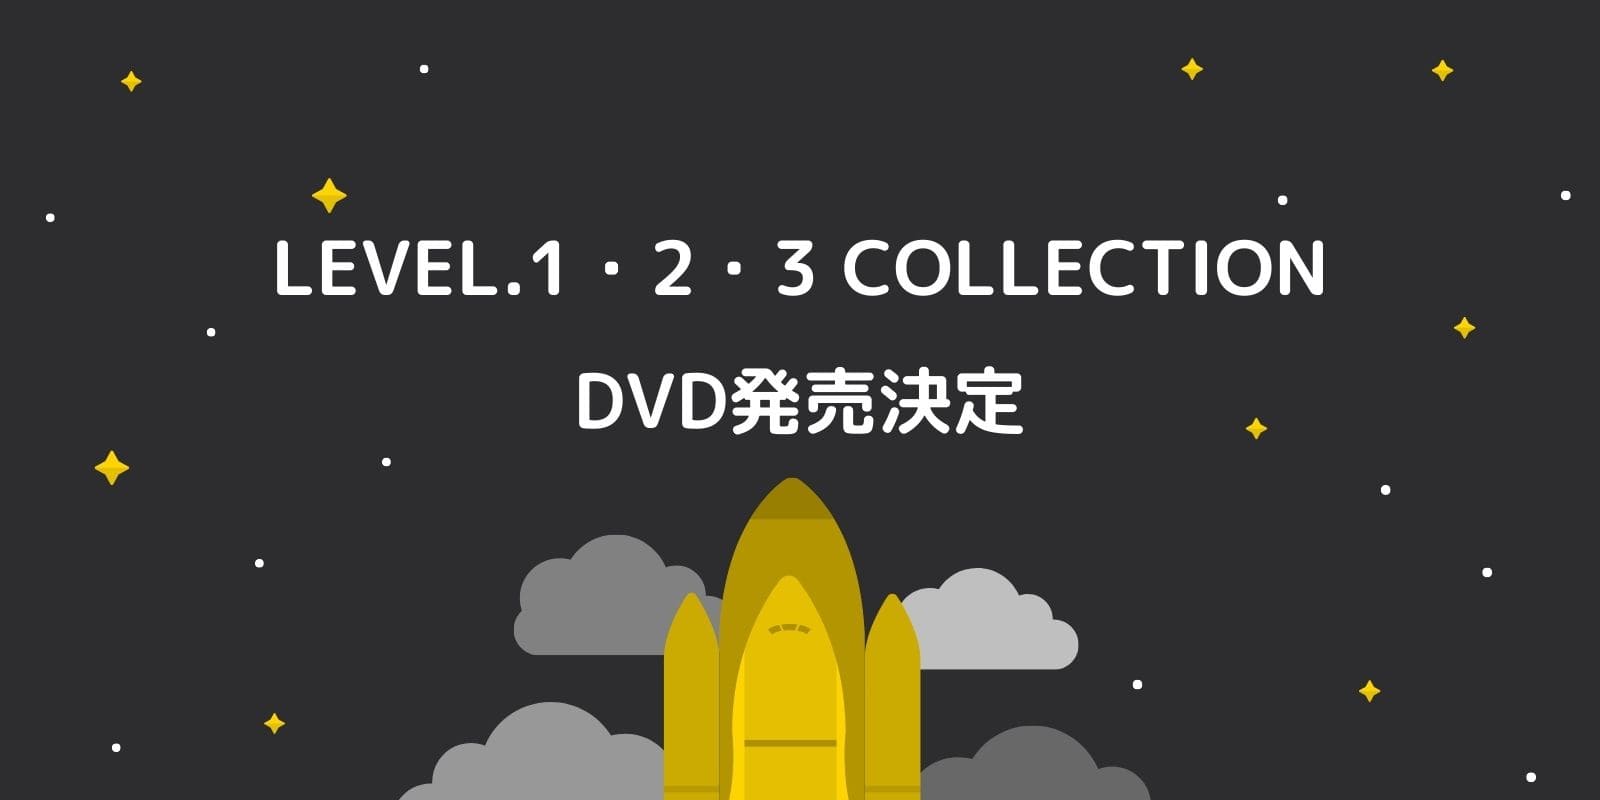 LEVEL.1・2・3 COLLECTION